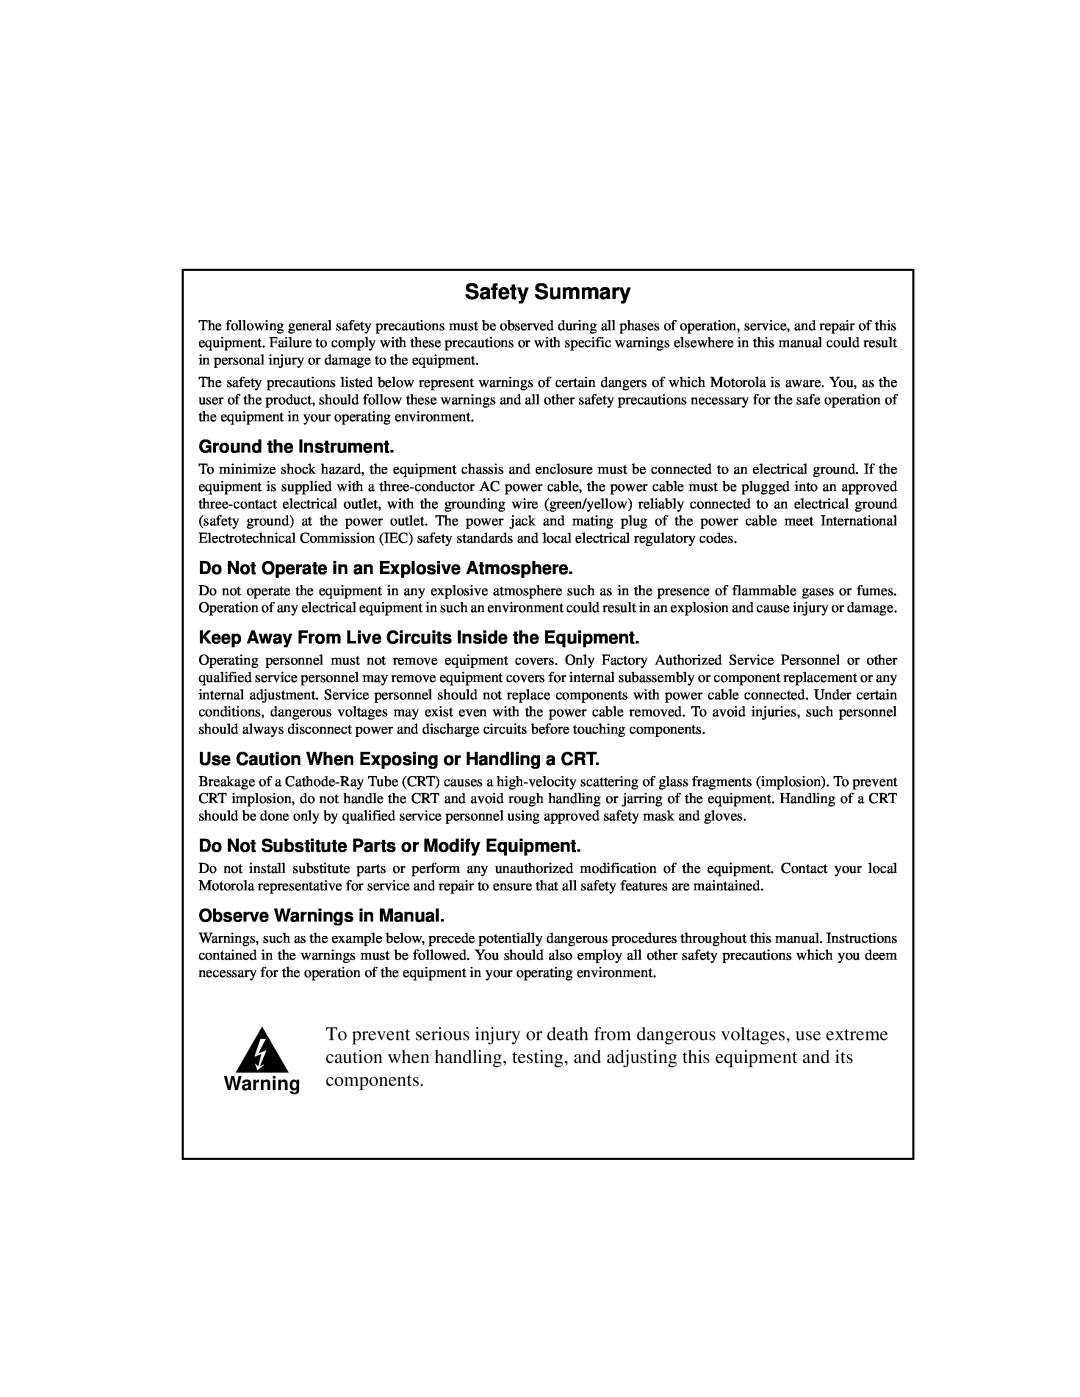 Motorola IH5 Safety Summary, Ground the Instrument, Do Not Operate in an Explosive Atmosphere, Observe Warnings in Manual 